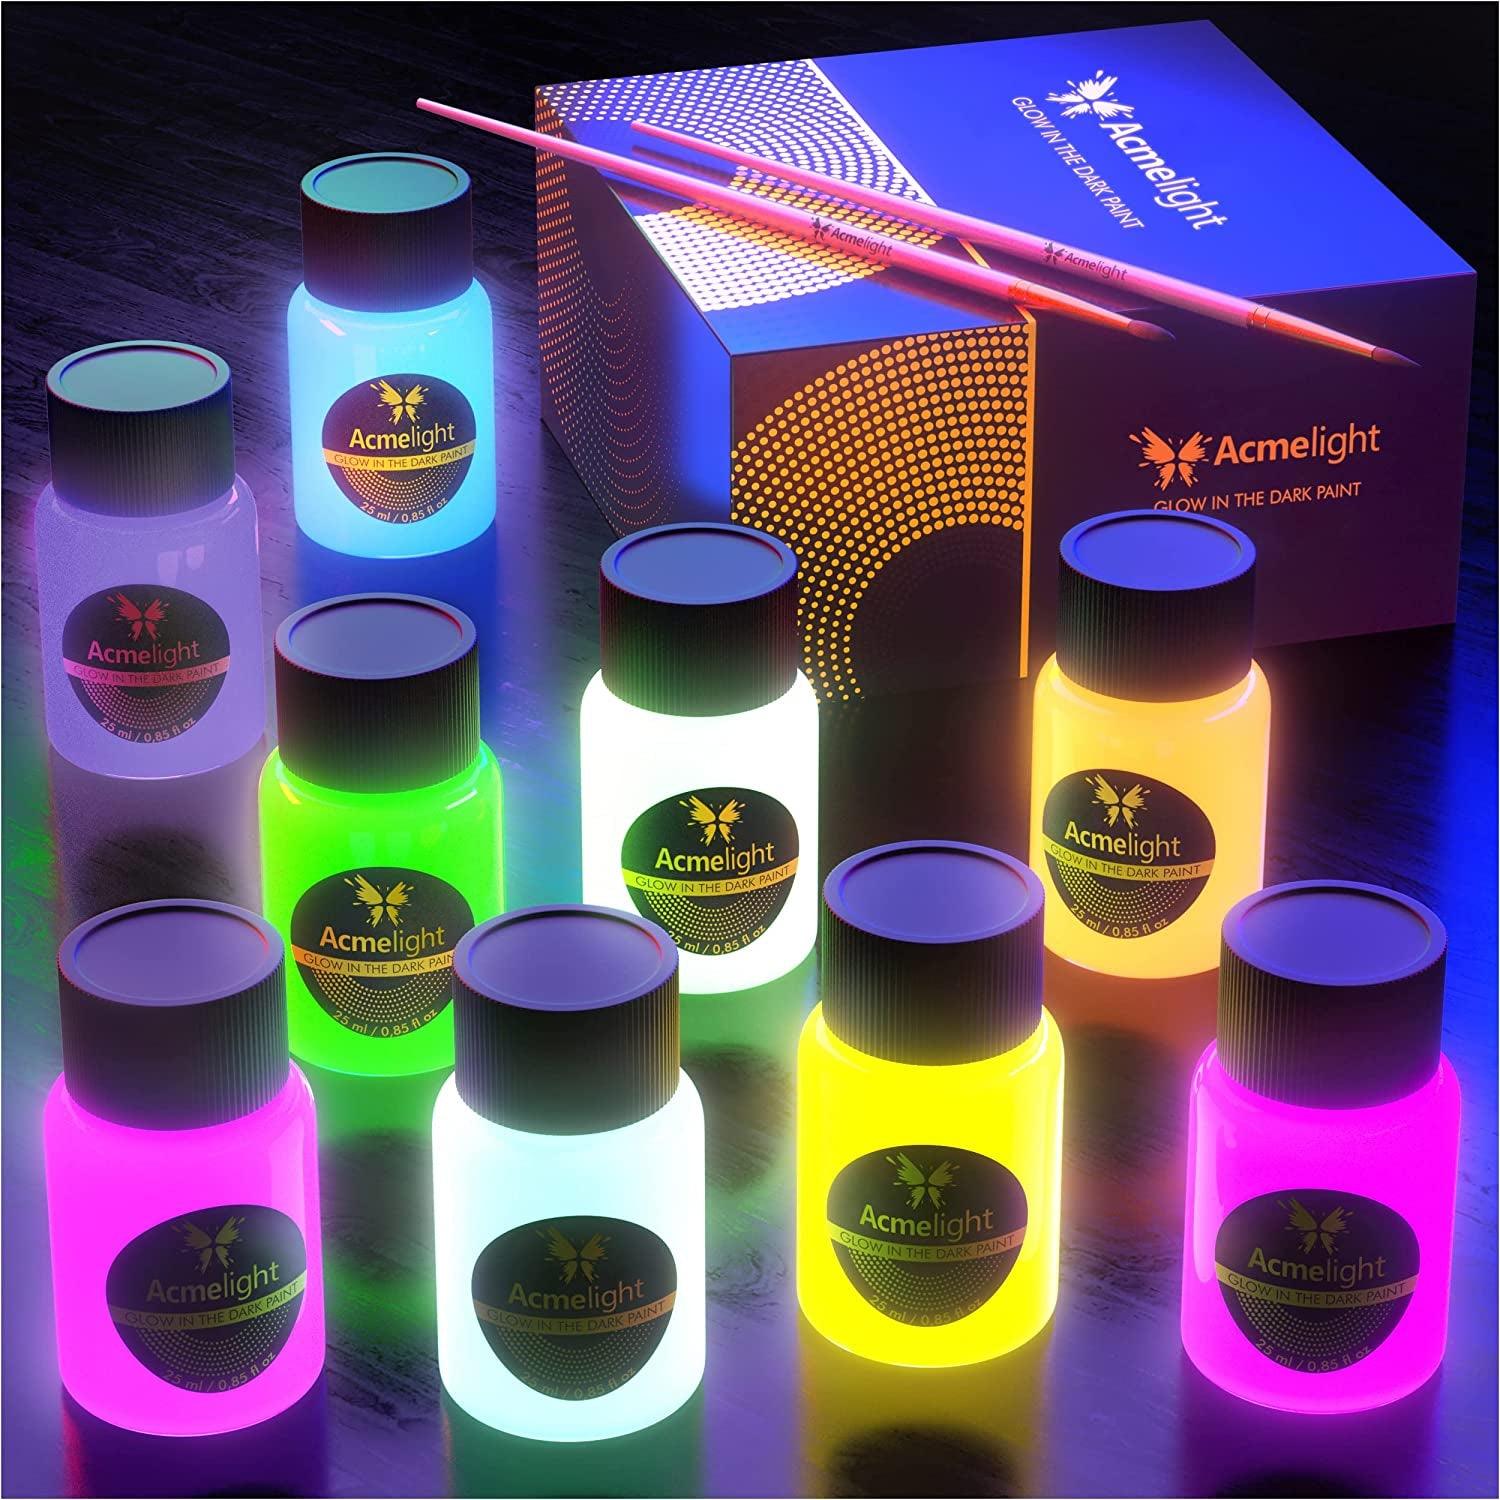  Fantastory Glow in The Dark Paint,10 Extra Bright